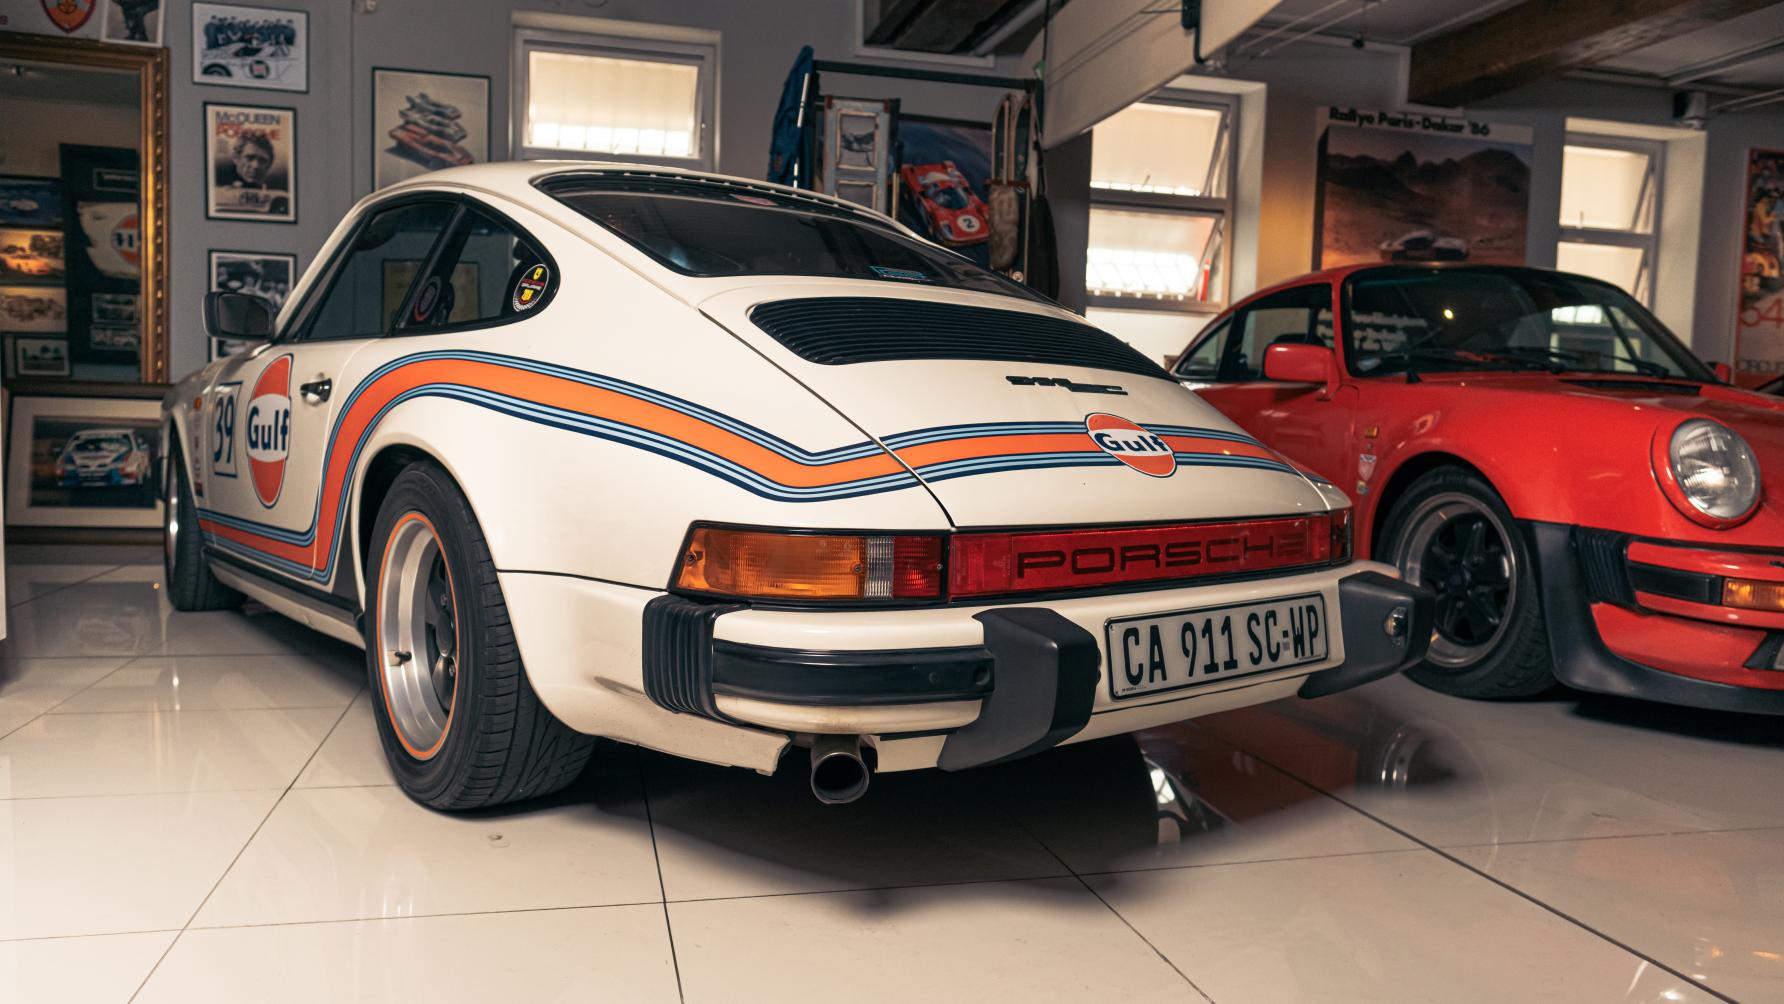 White Porsche in the collection of Michelle Hambly-Grobler